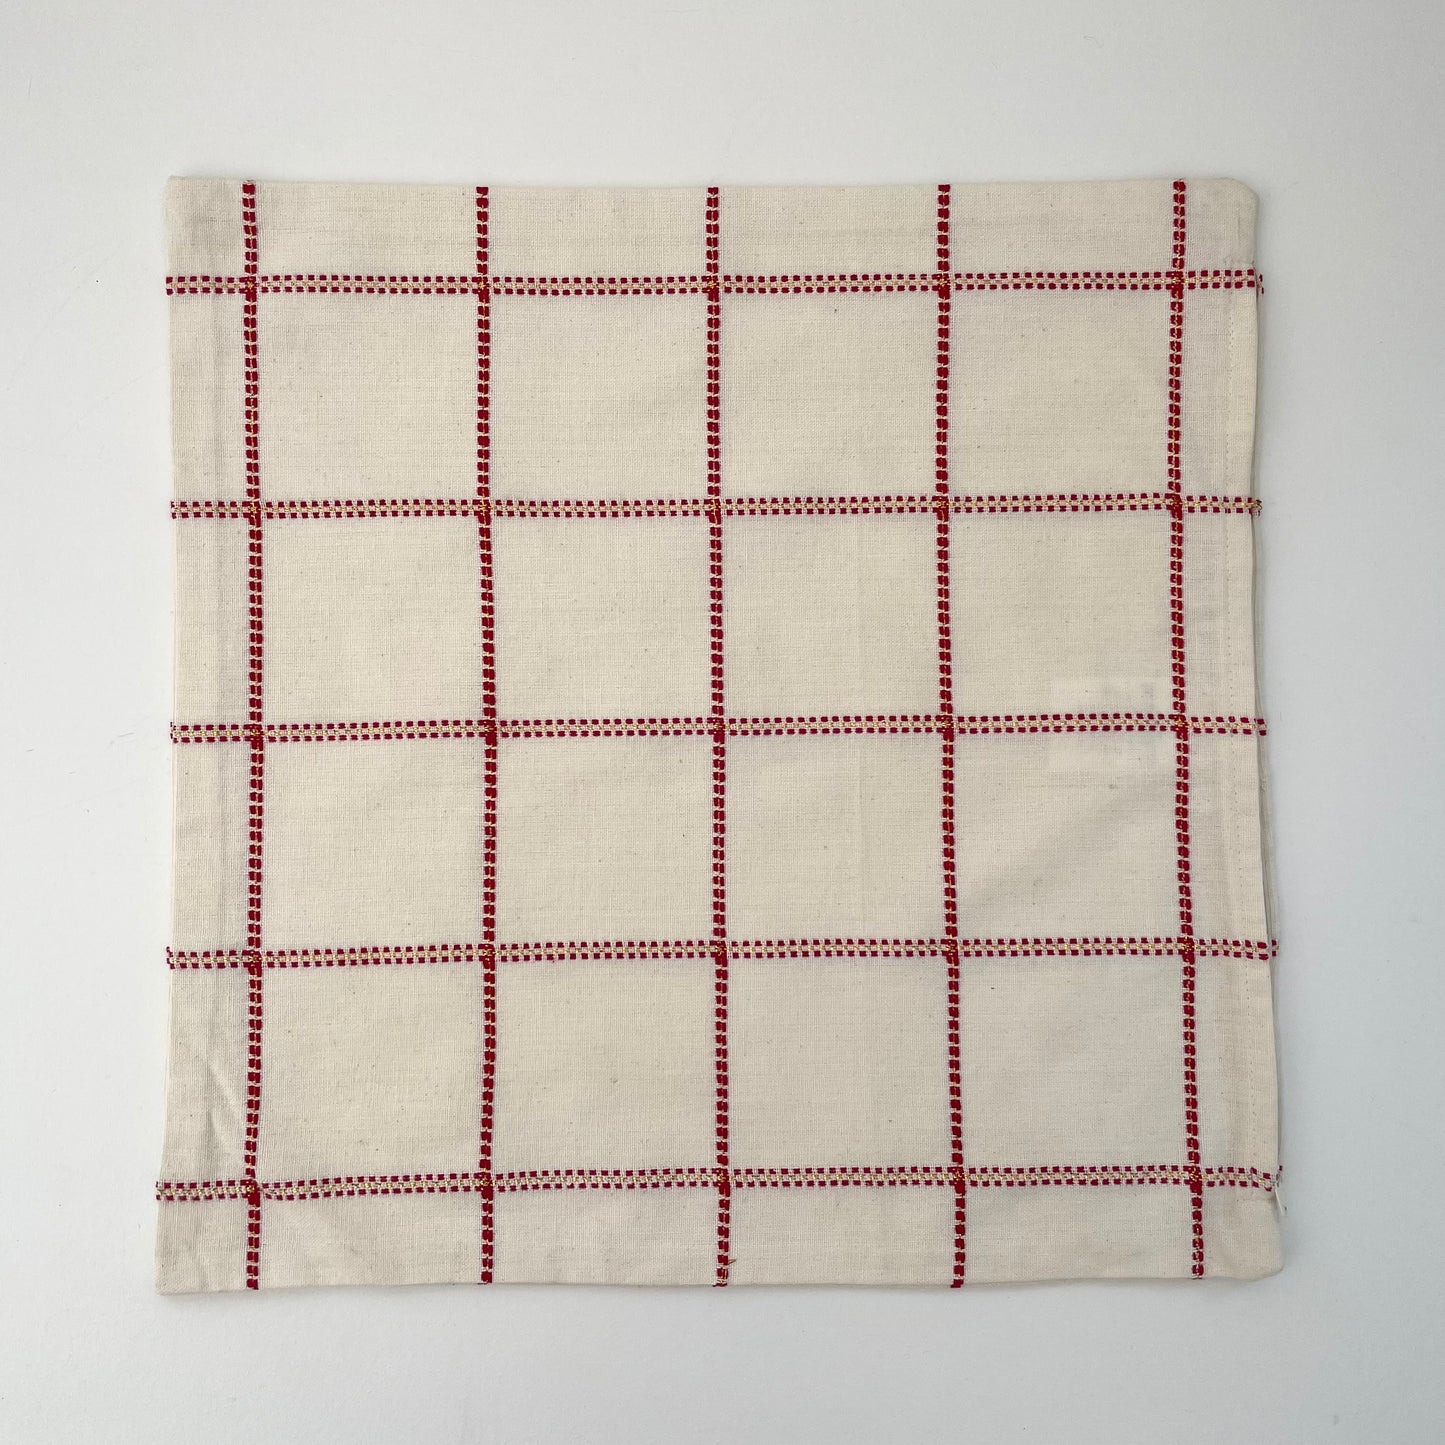 16 x 16 hand woven check pillow cover - red/cream